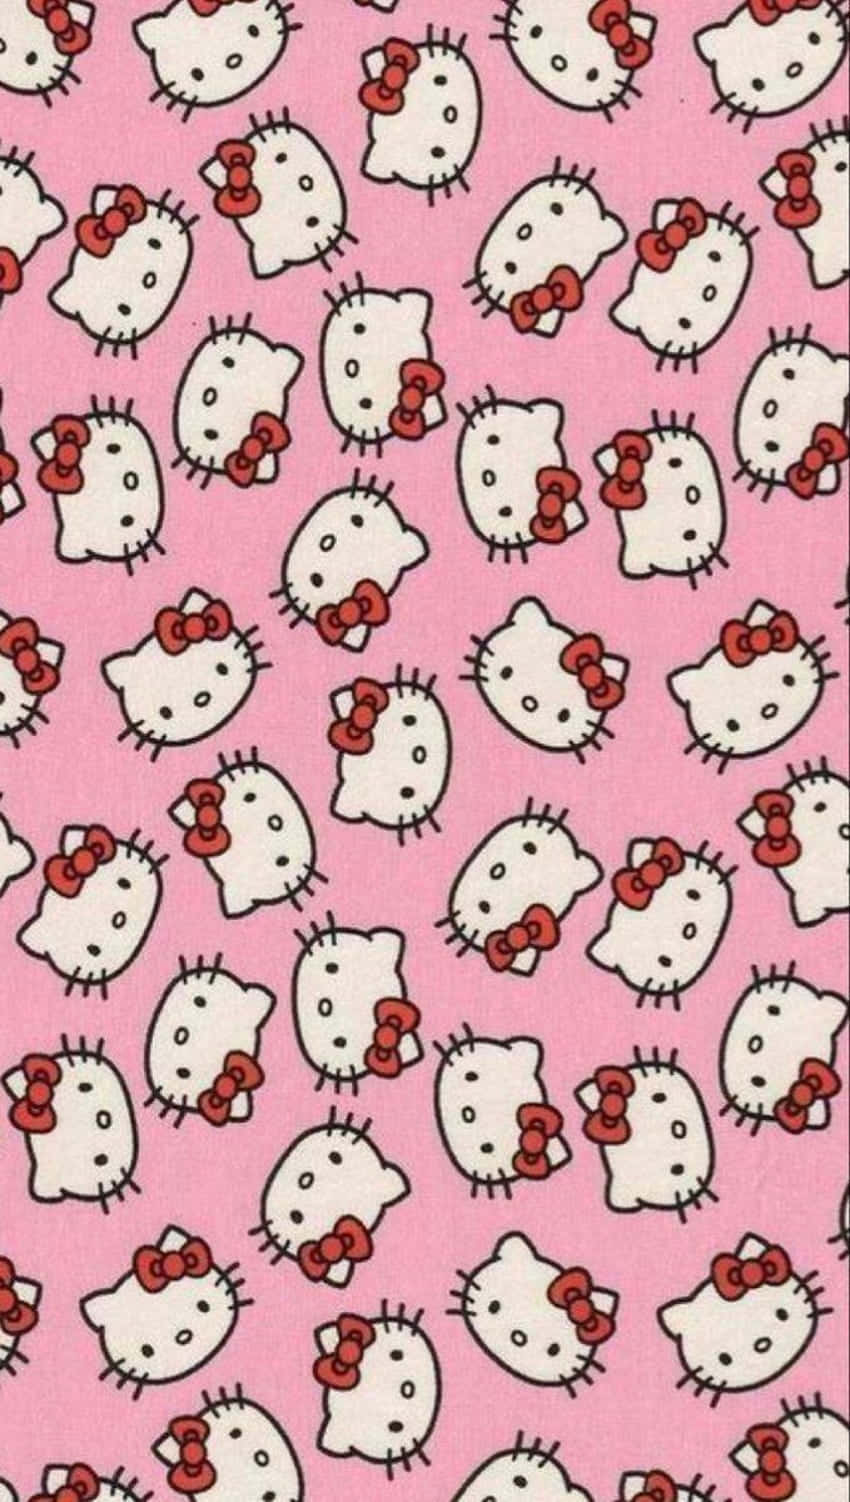 Emo Hello Kitty Expressing a Unique Personality Wallpaper